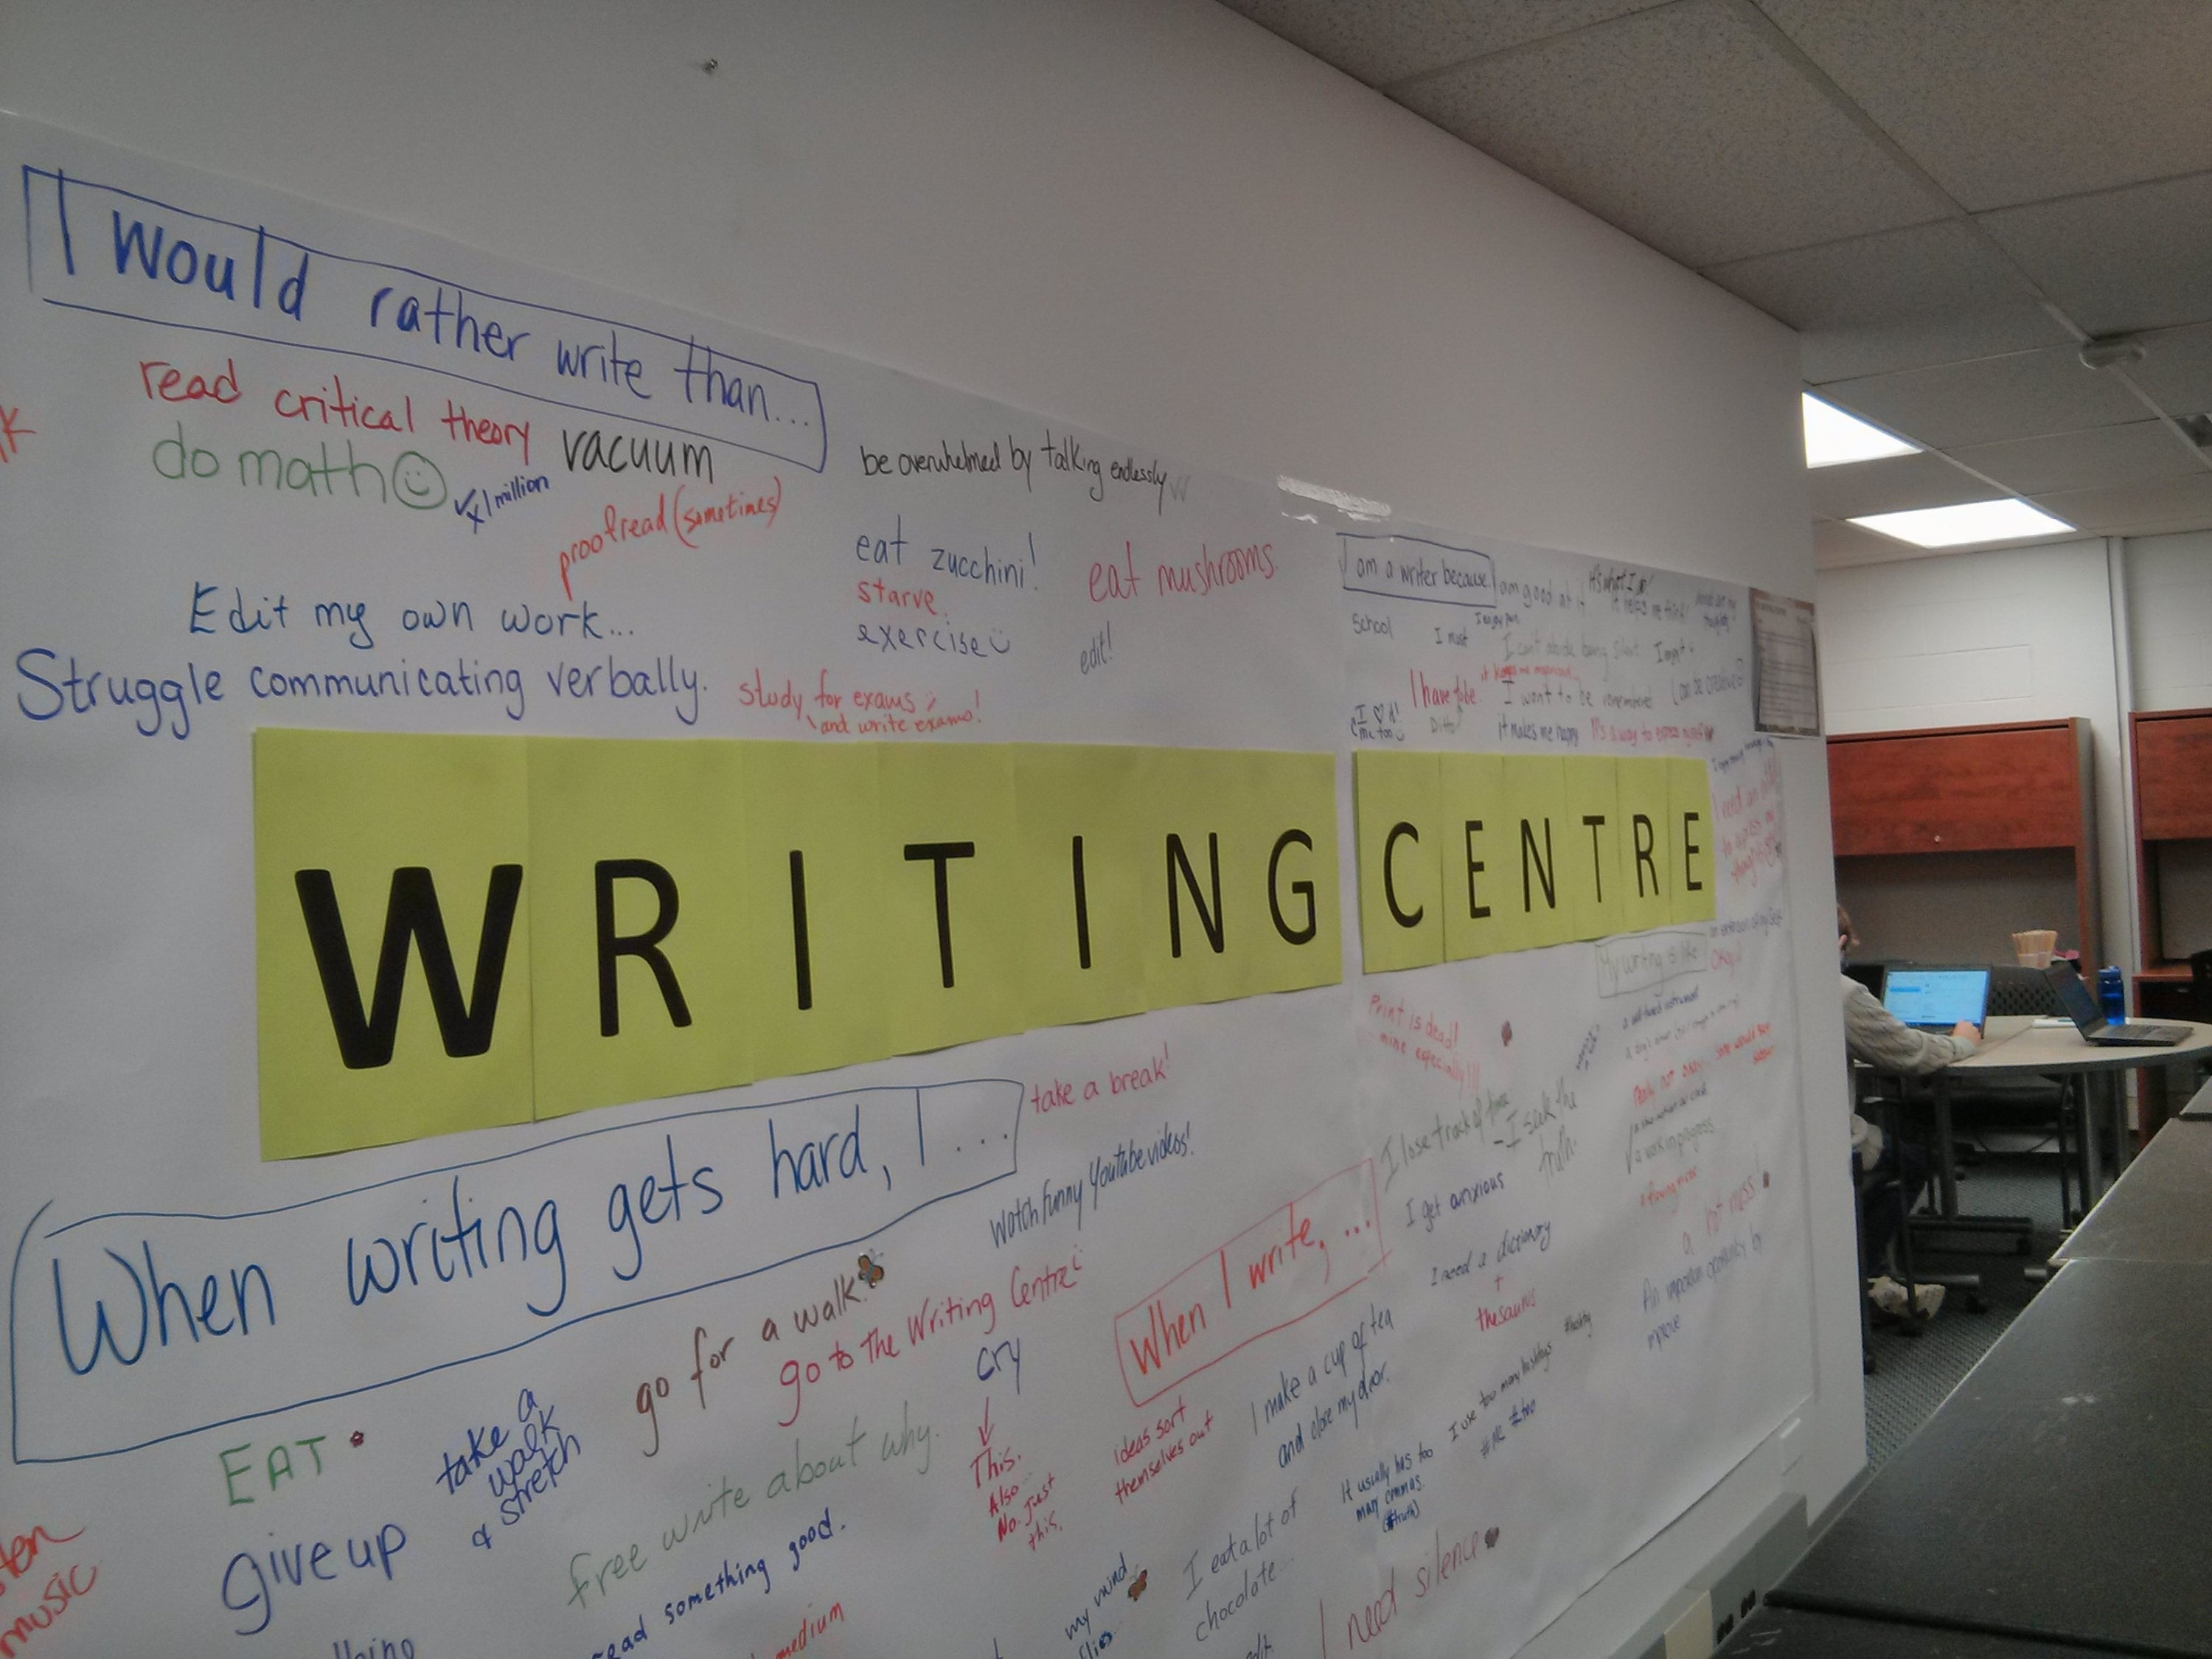 Writing Centre mural with writing and comments all over it